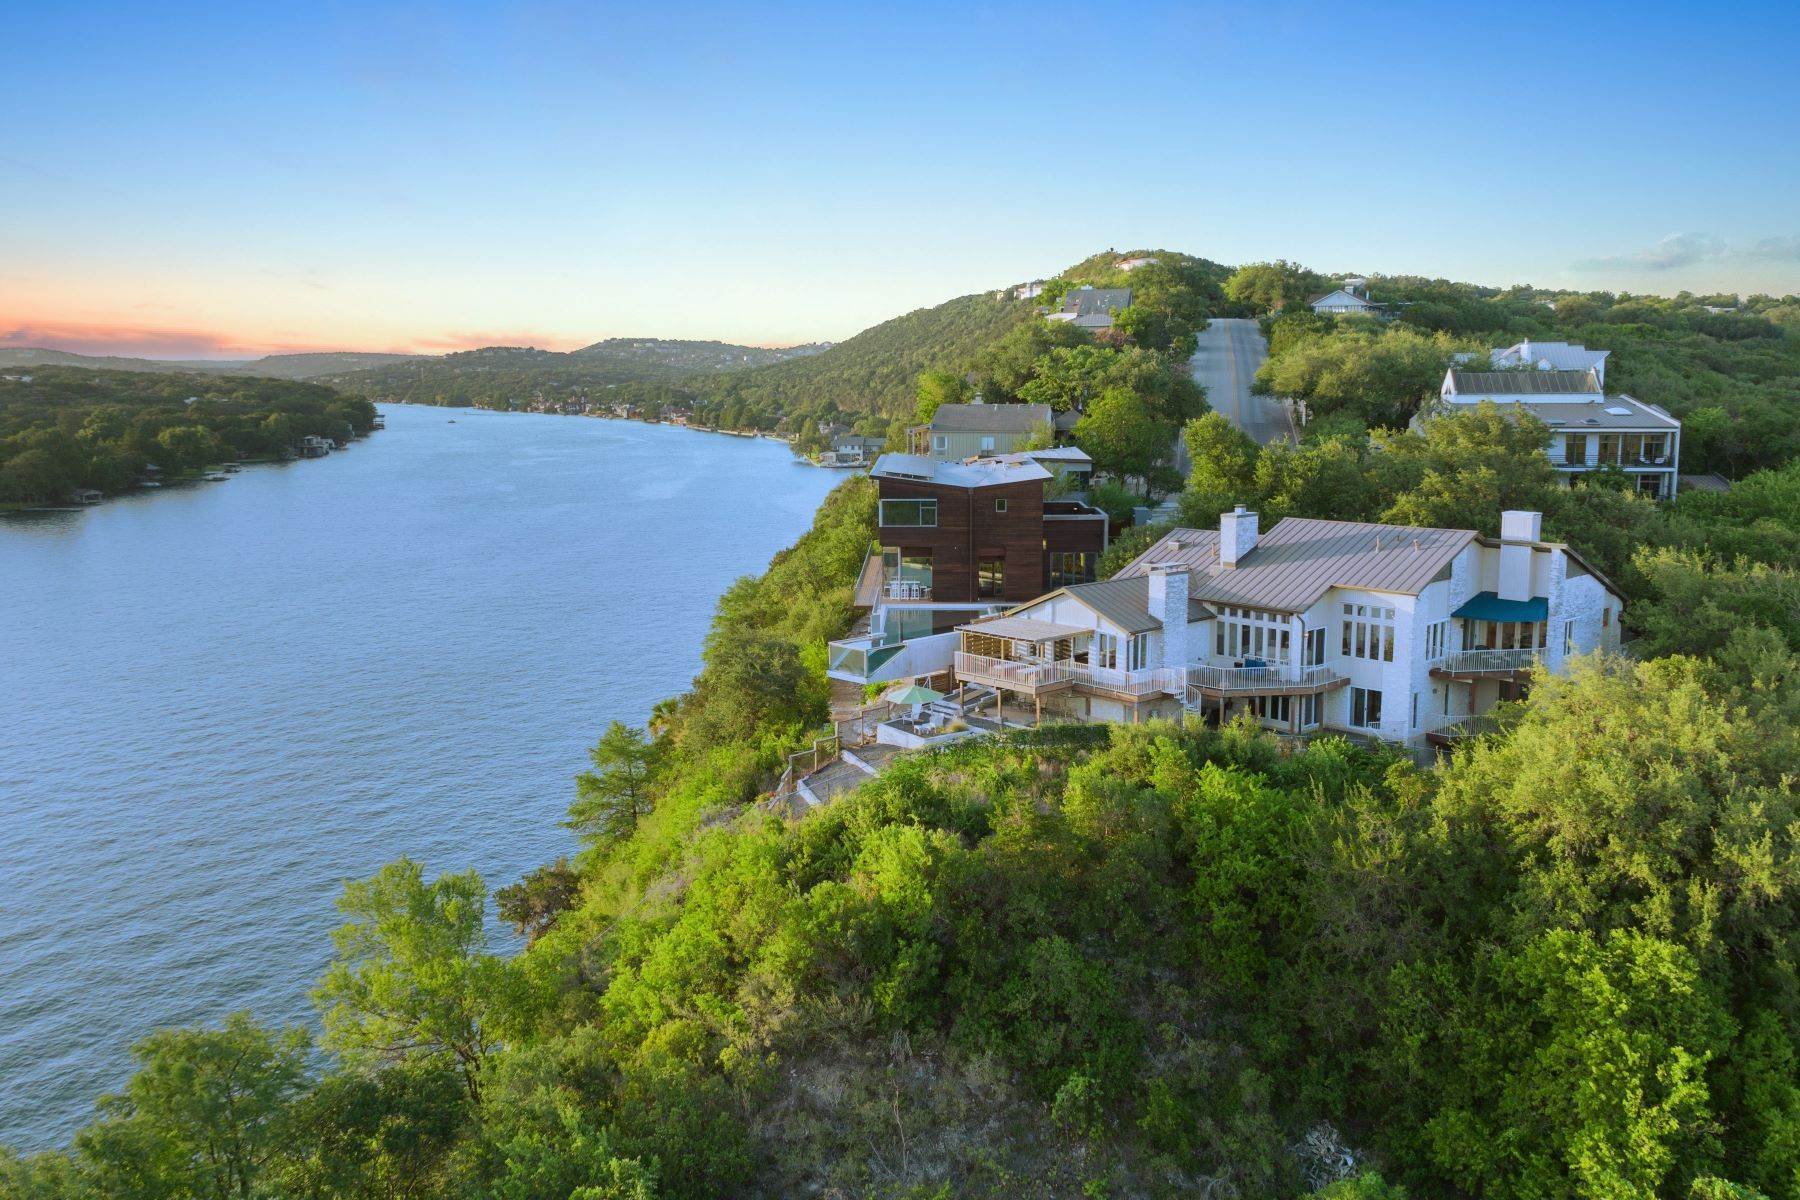 Single Family Homes for Sale at Hilltop on Lake Austin 3400 Mount Bonnell Road Austin, Texas 78731 United States